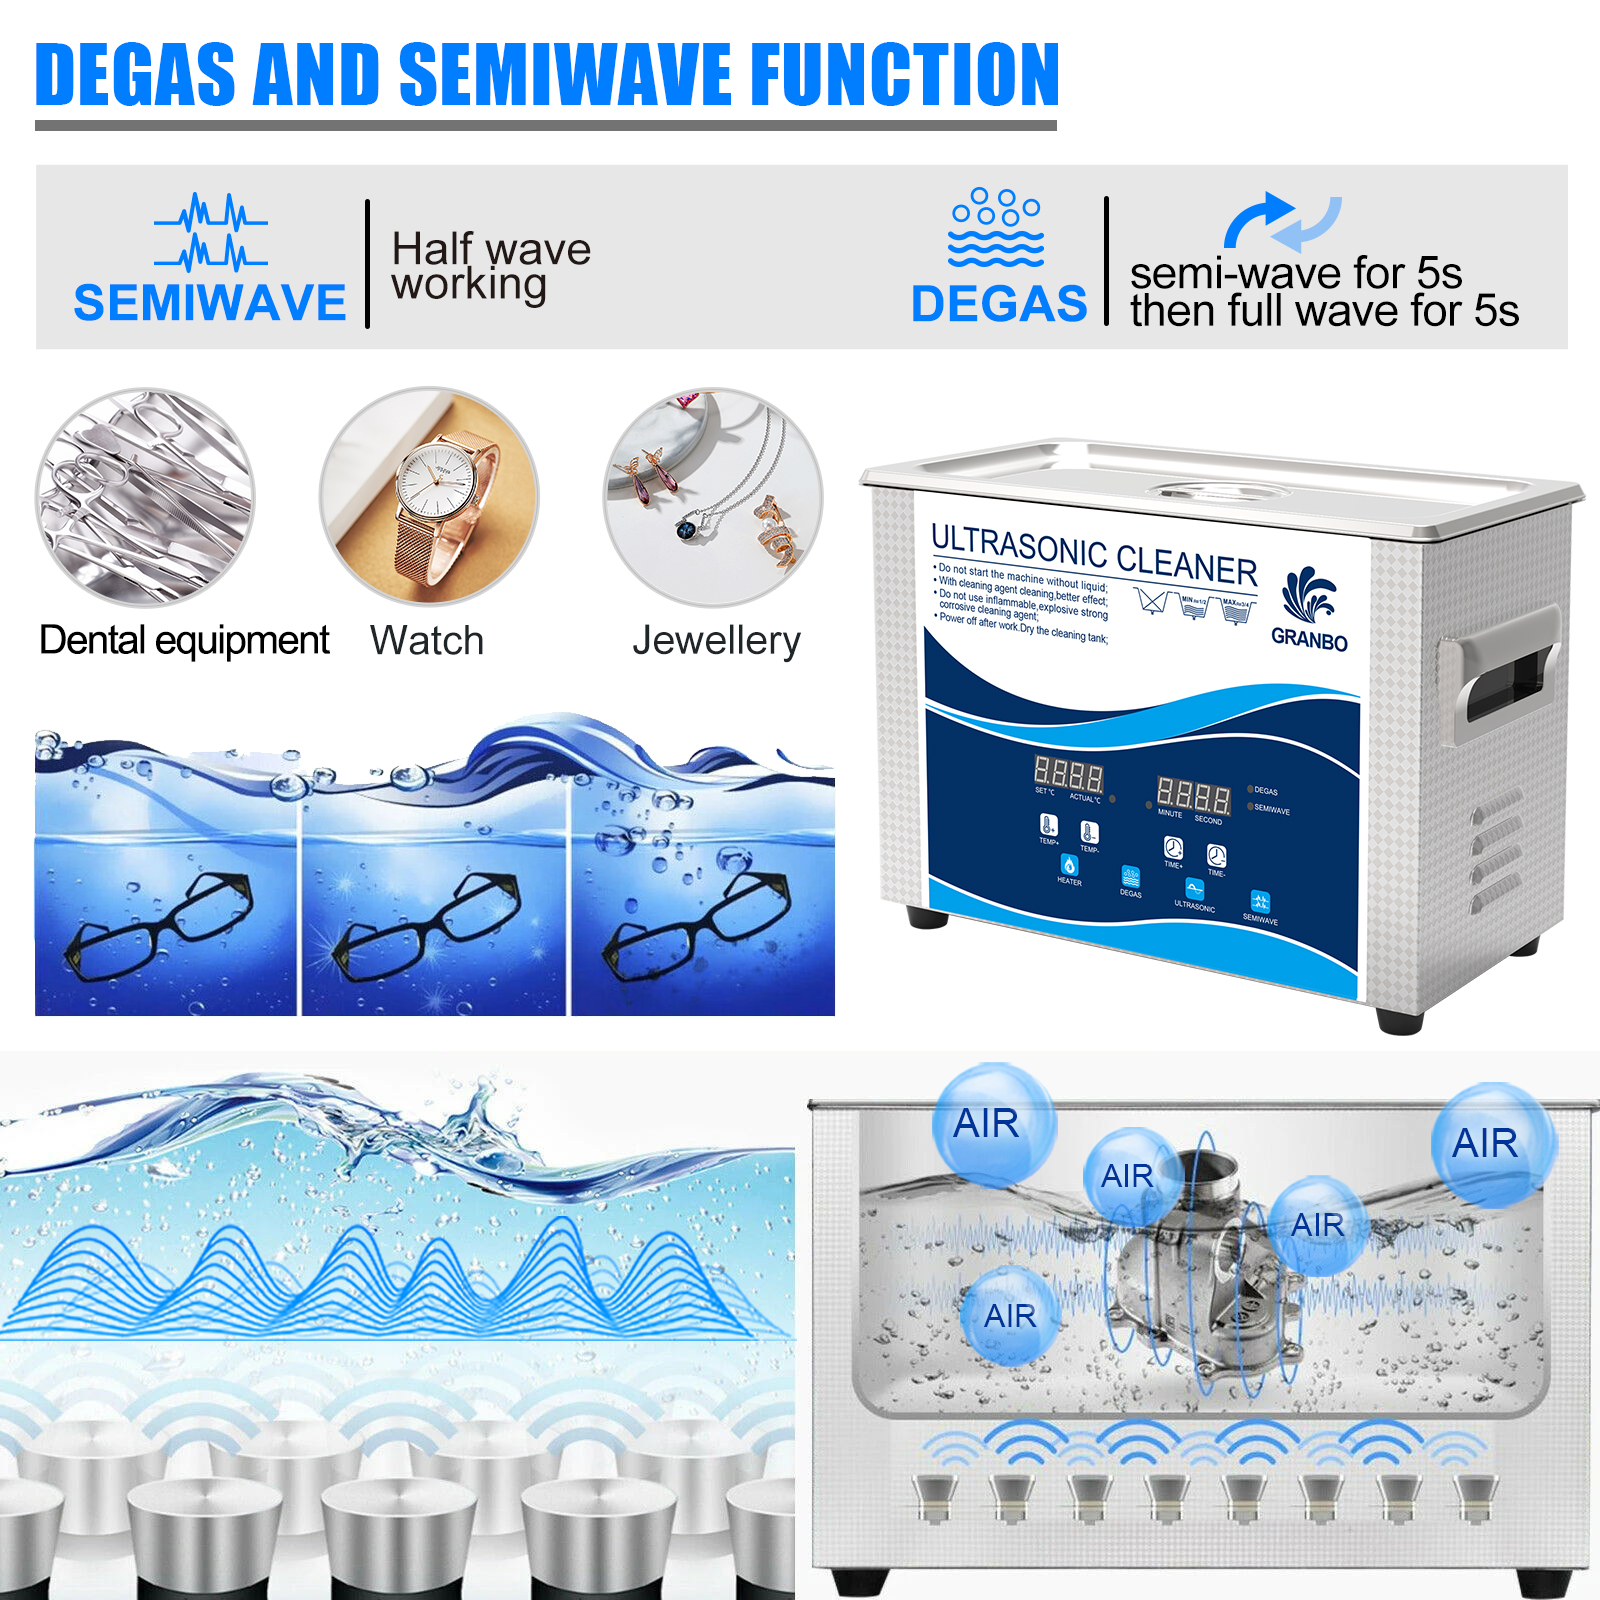 GW series ultrasonic cleaners have the characteristics of degassing and semiwave functions